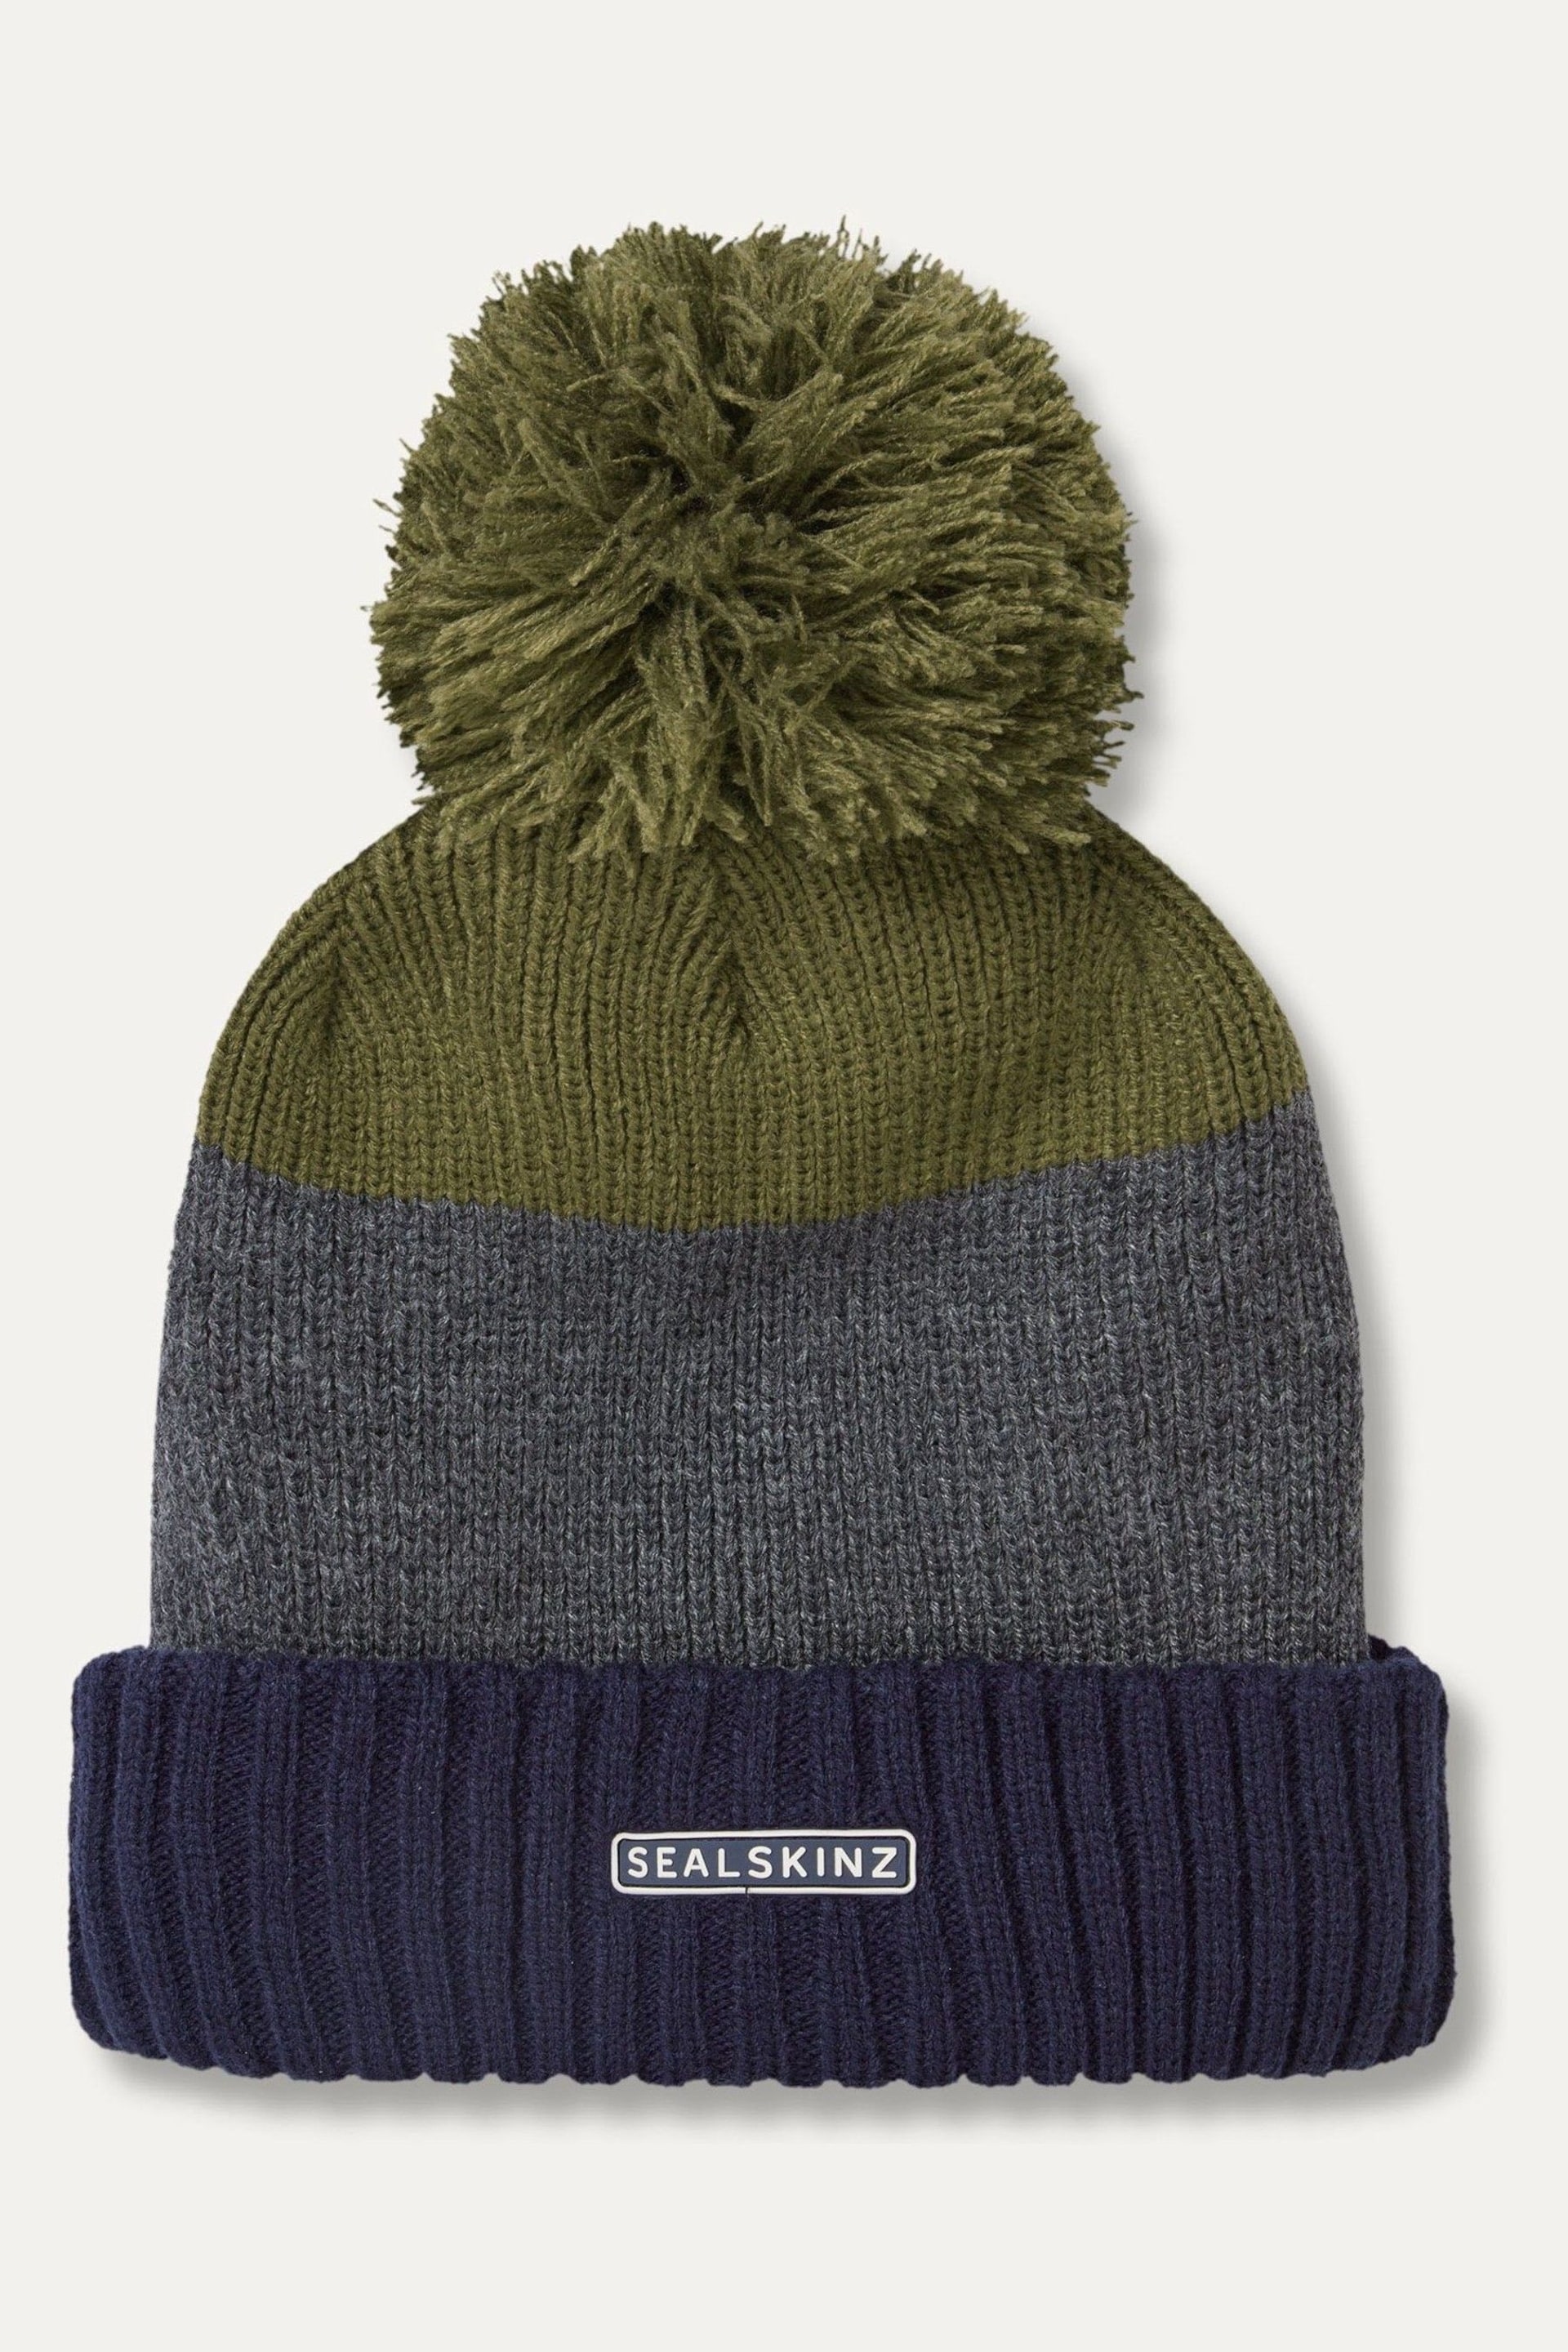 Sealskinz Flitcham Waterproof Cold Weather Bobble Hat - Image 1 of 2